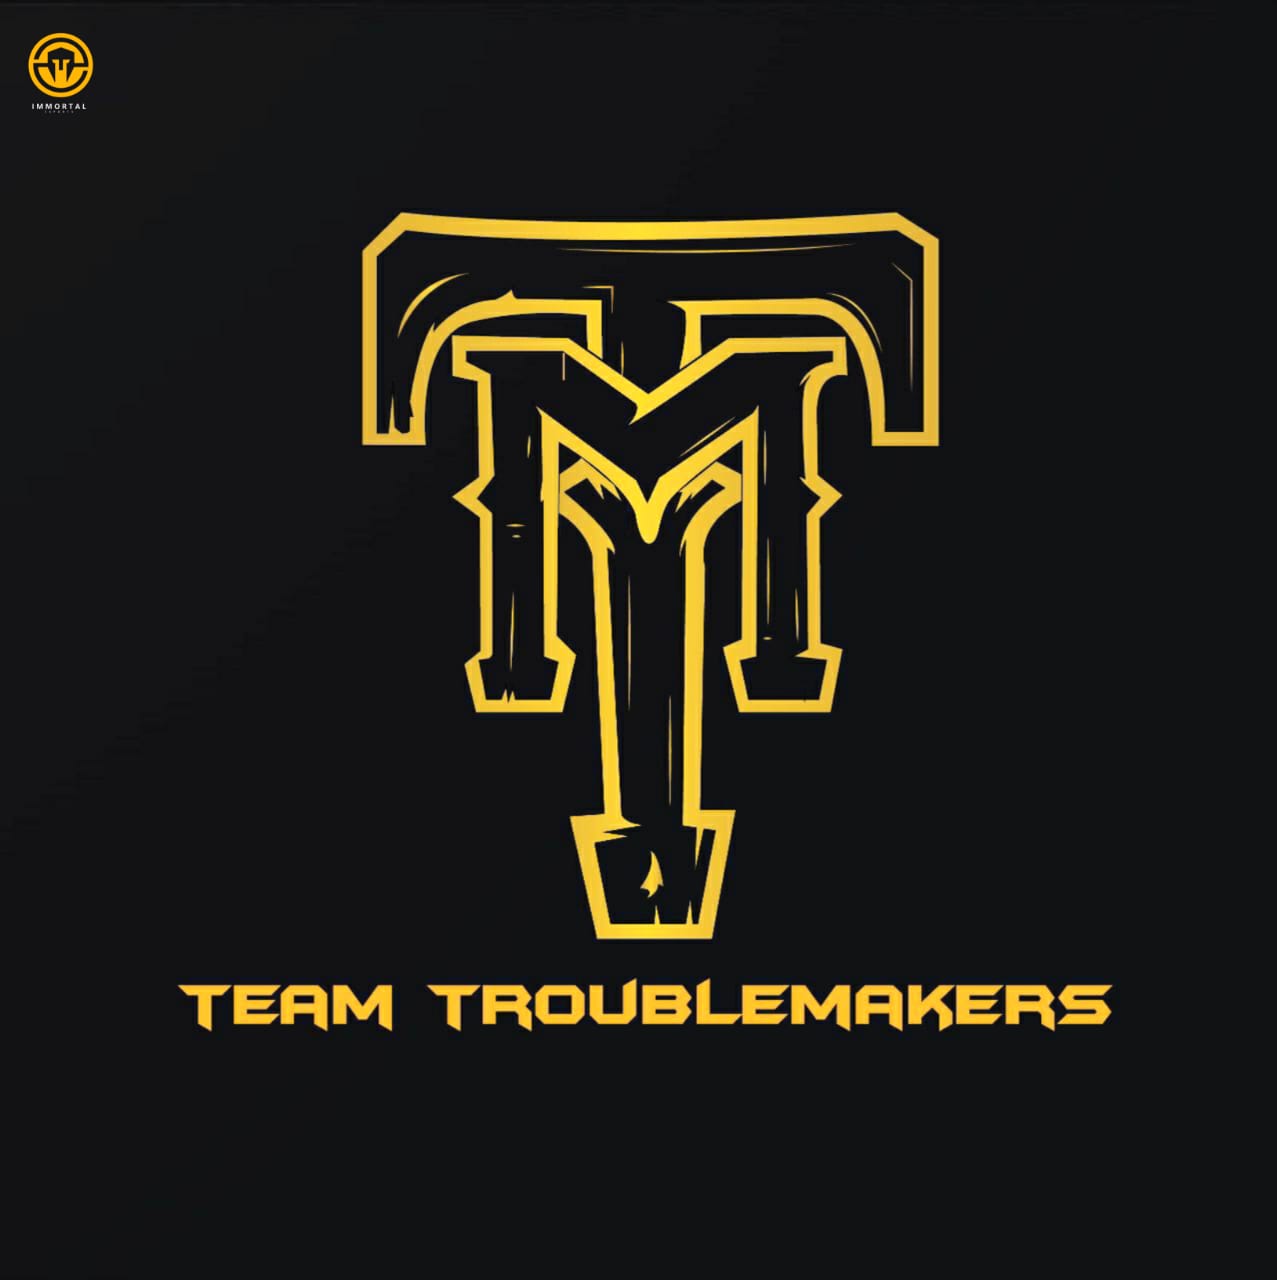 TEAM TROUBLEMAKERS